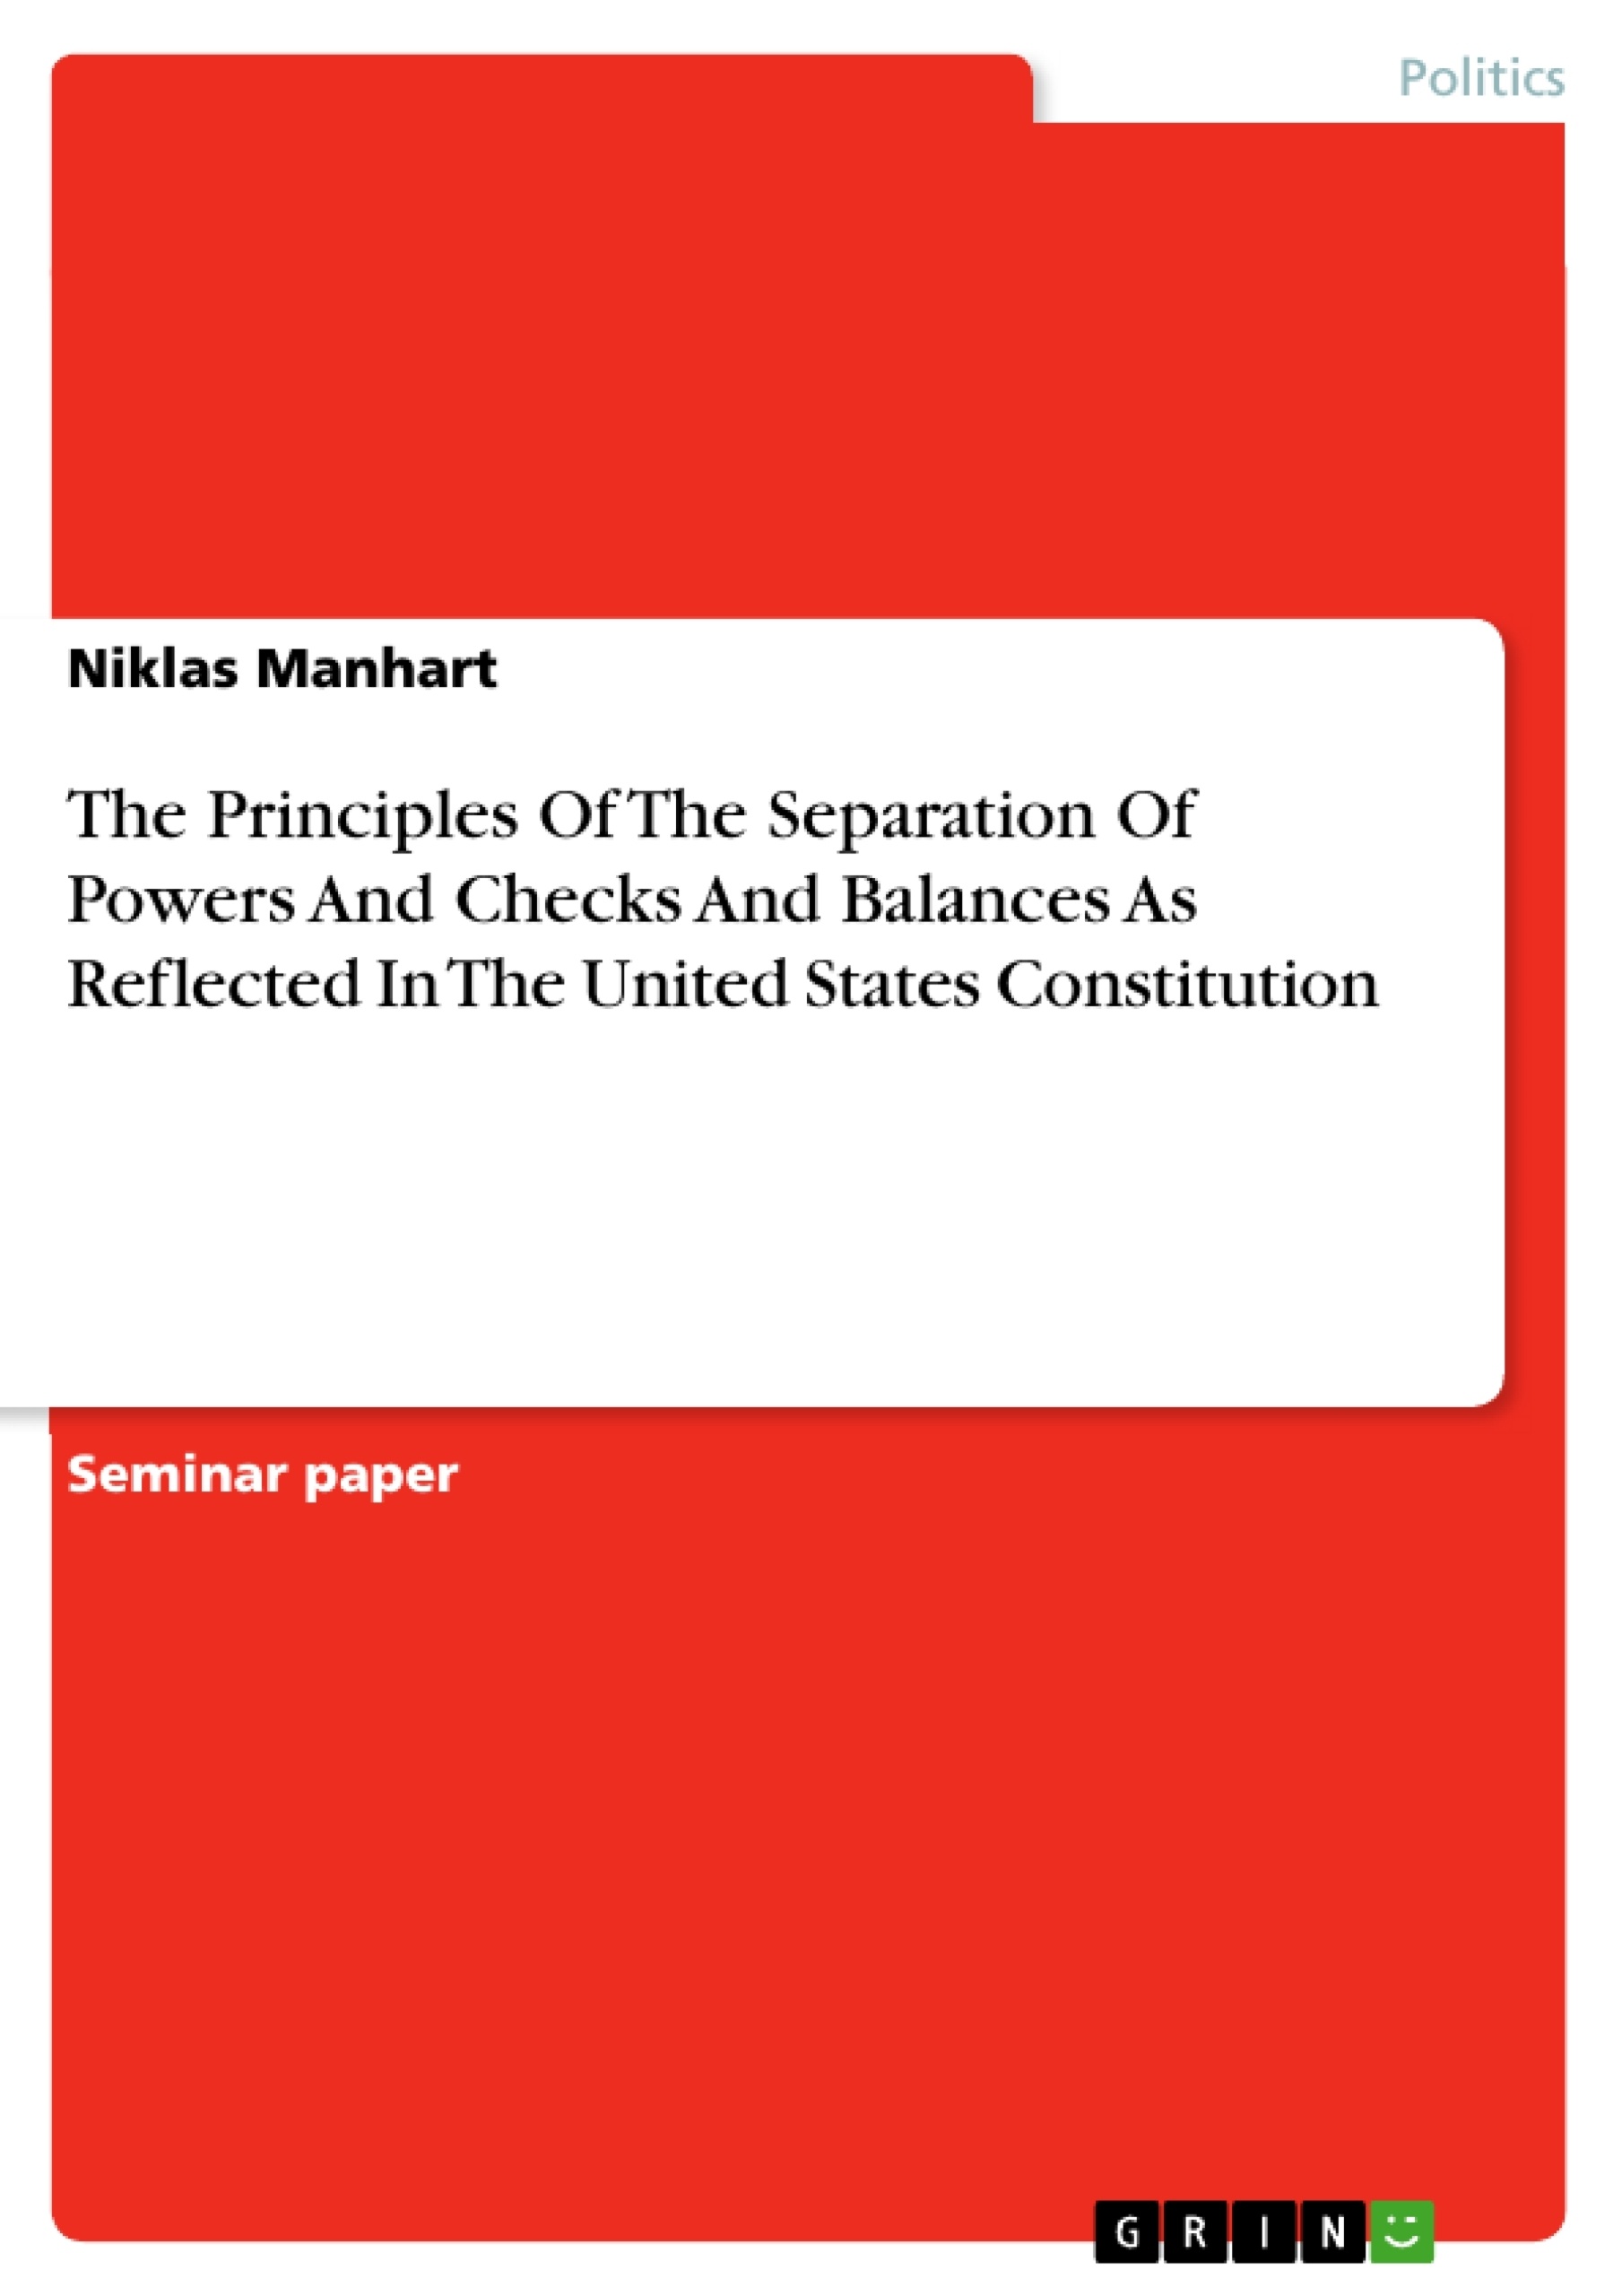 Título: The Principles Of The Separation Of Powers And Checks And Balances As Reflected In The United States Constitution